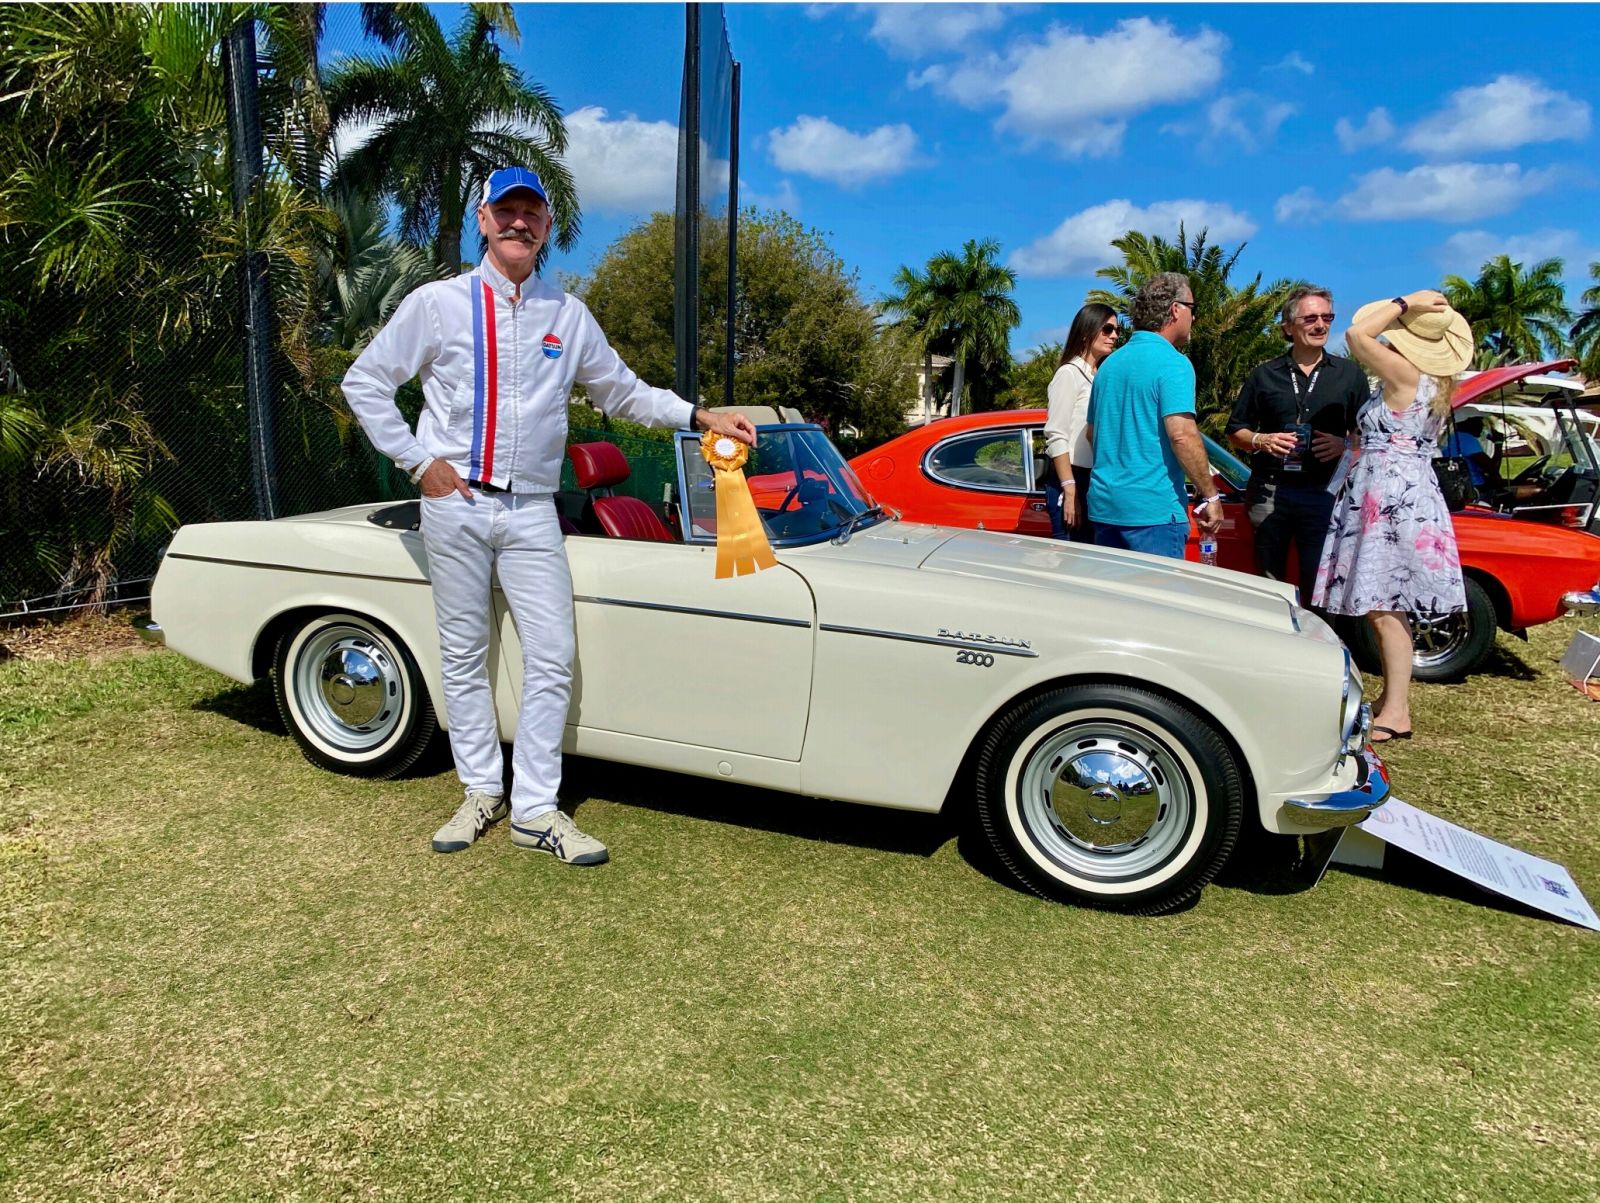 Illustration for article titled Datsun Roadster Wins Best in Class at Boca Raton Concours D’ Elegance